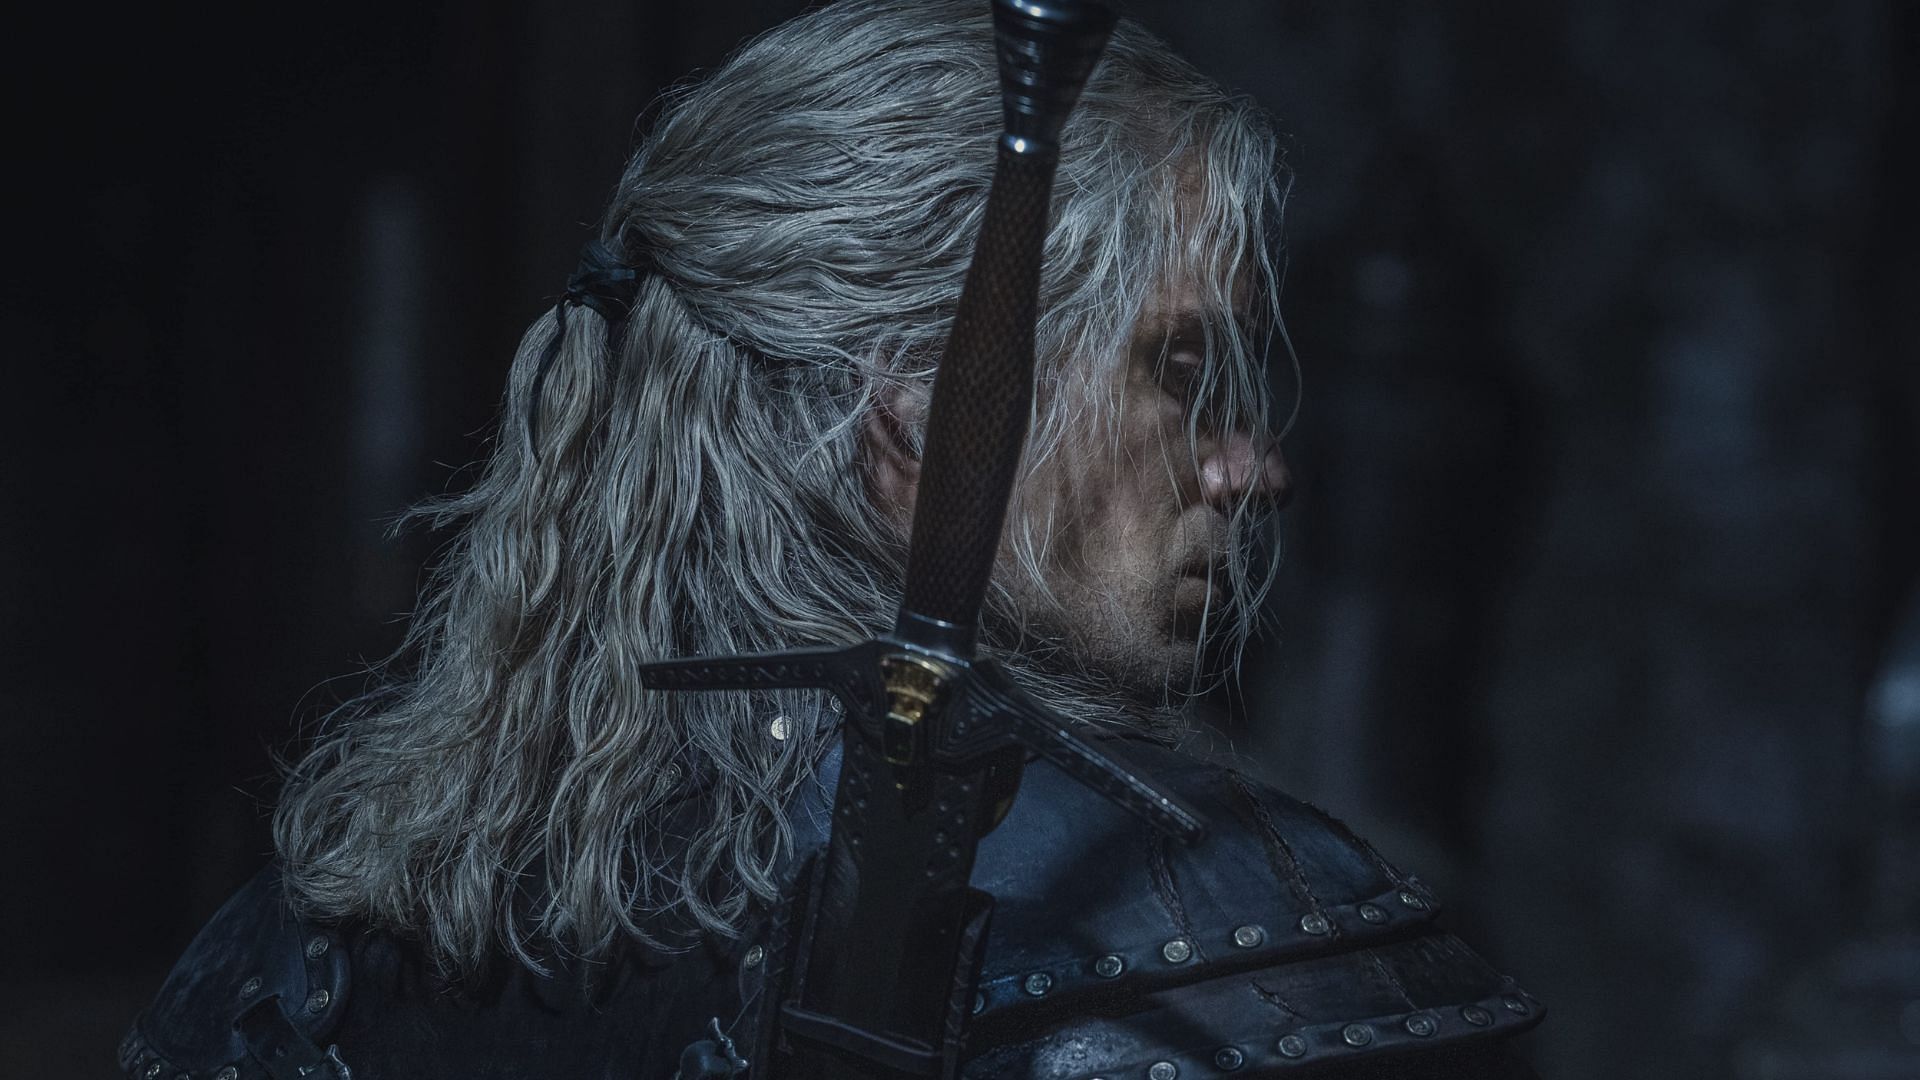 A still from The Witcher (Image via IMDB)